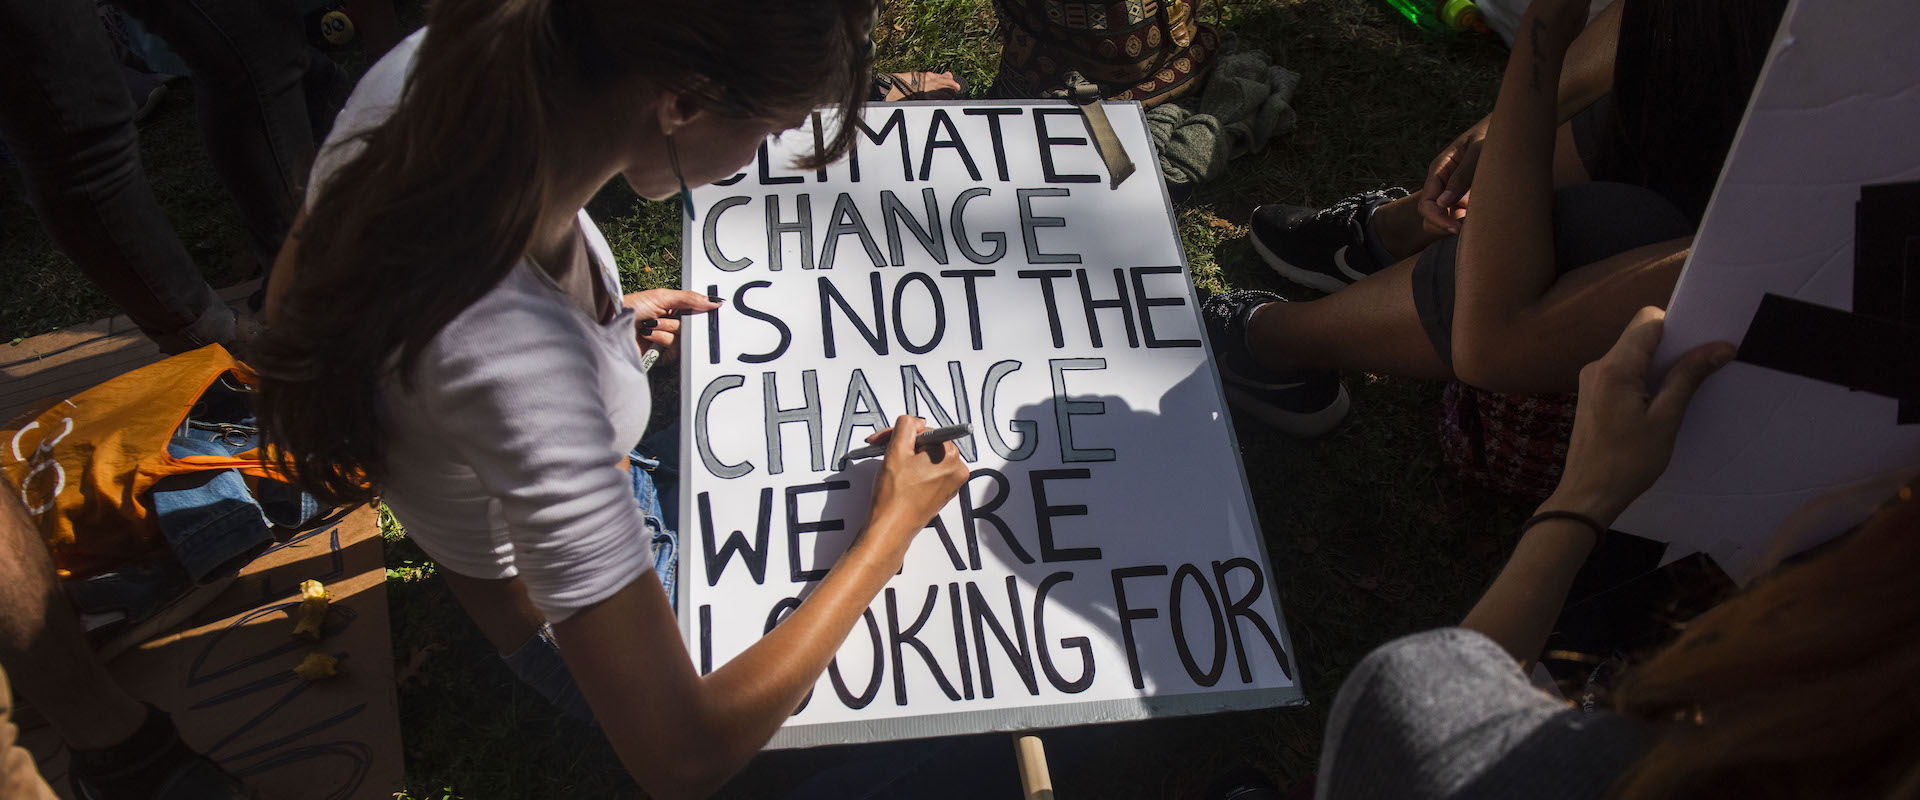 A scene from the 20 September 2019 demonstration in downtown New York as part of the youth-lead global #ClimateStrike. Photo: UN Women/Amanda Voisard